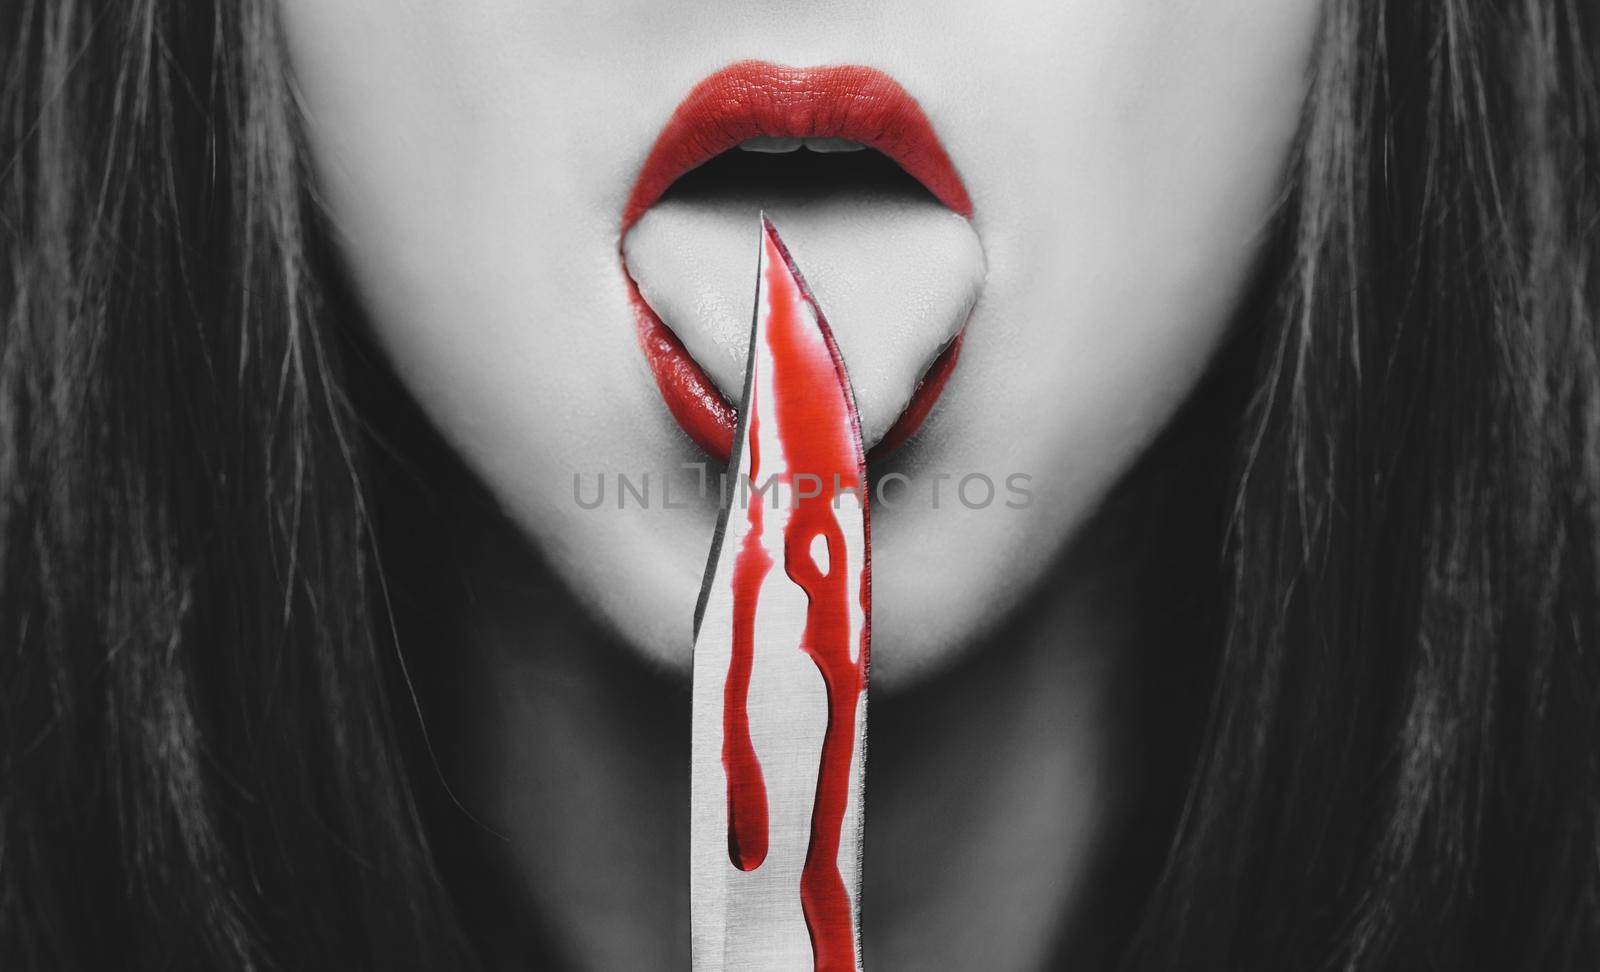 Dangerous young woman licking a knife in blood. Halloween or horror theme. Black and white image with red elements